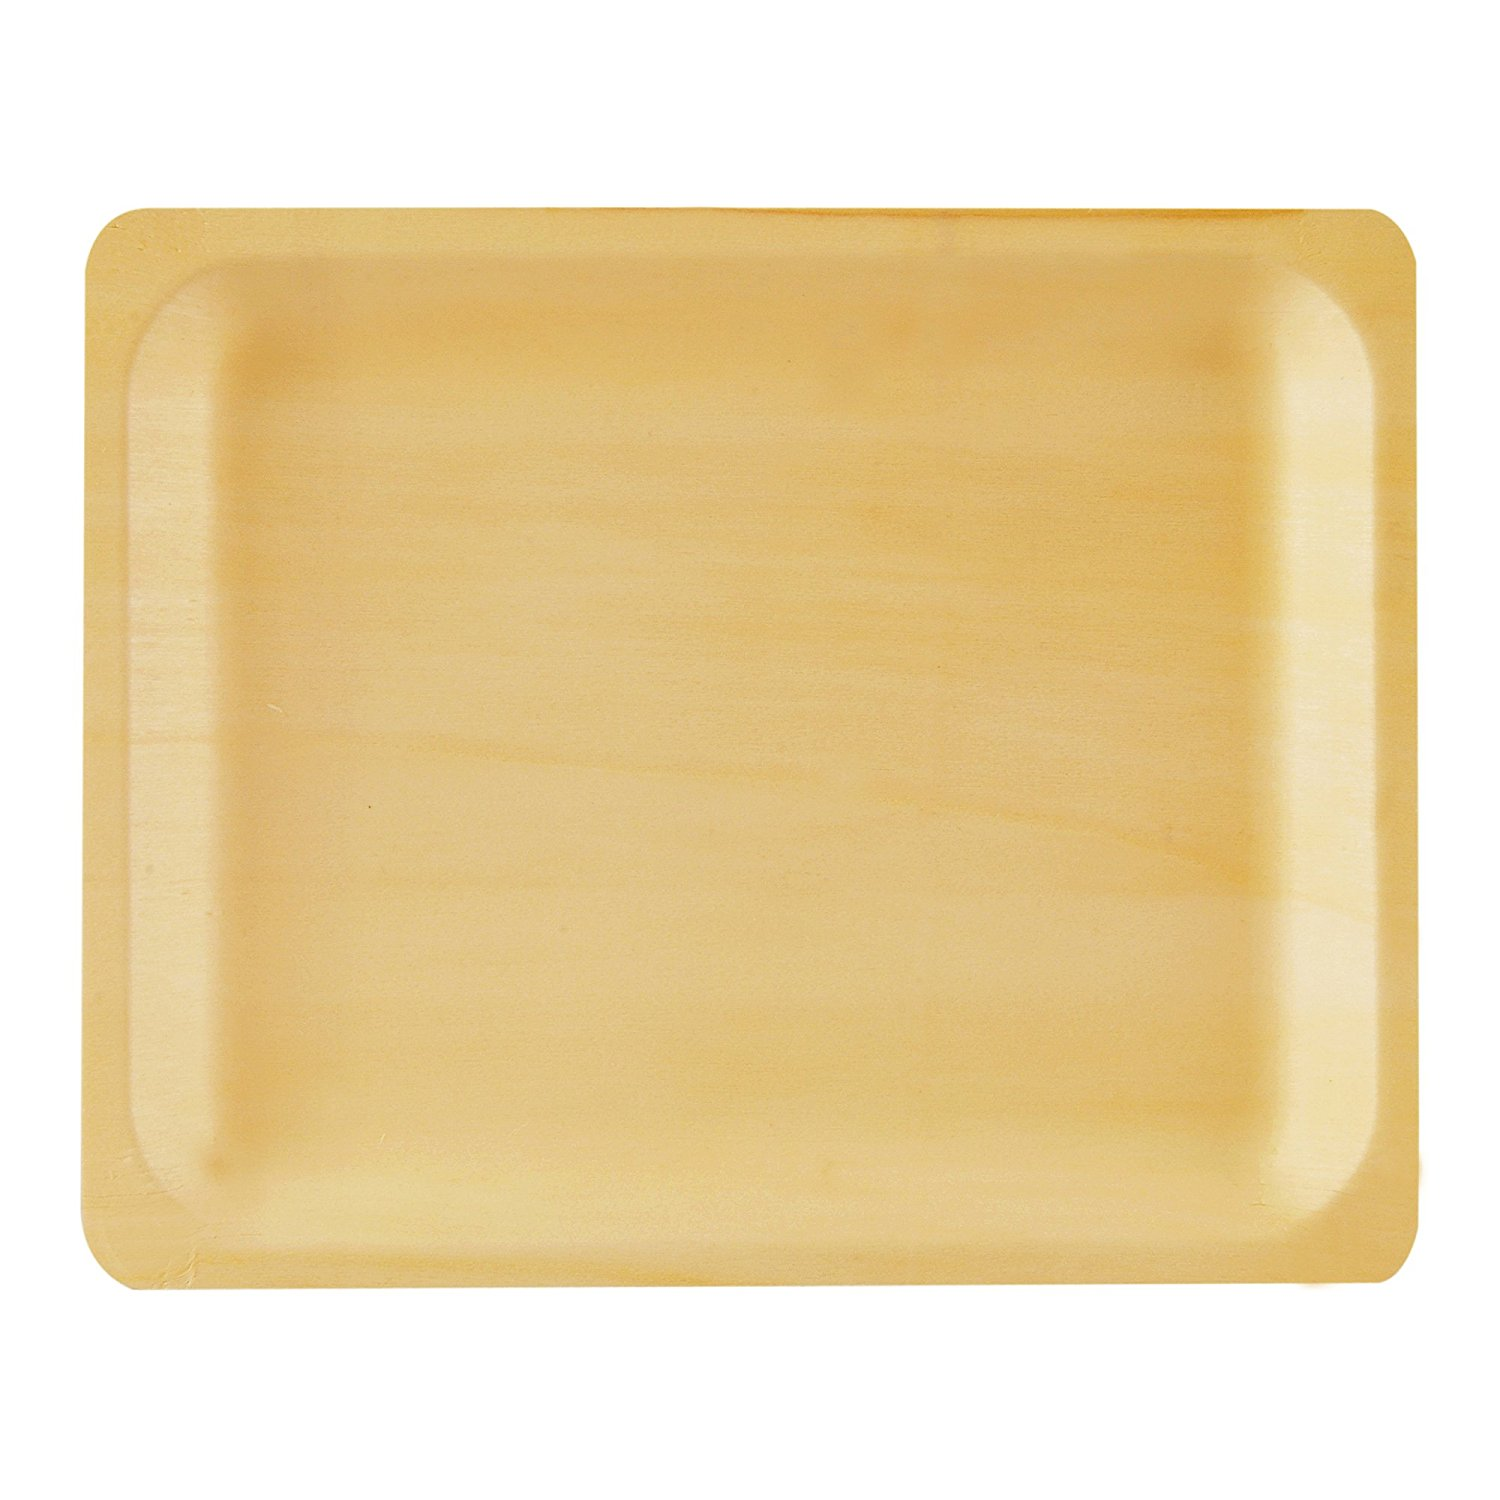 10" Wooden Disposable Rectangular Plates  Perfect Ware( Pack of 50ct)